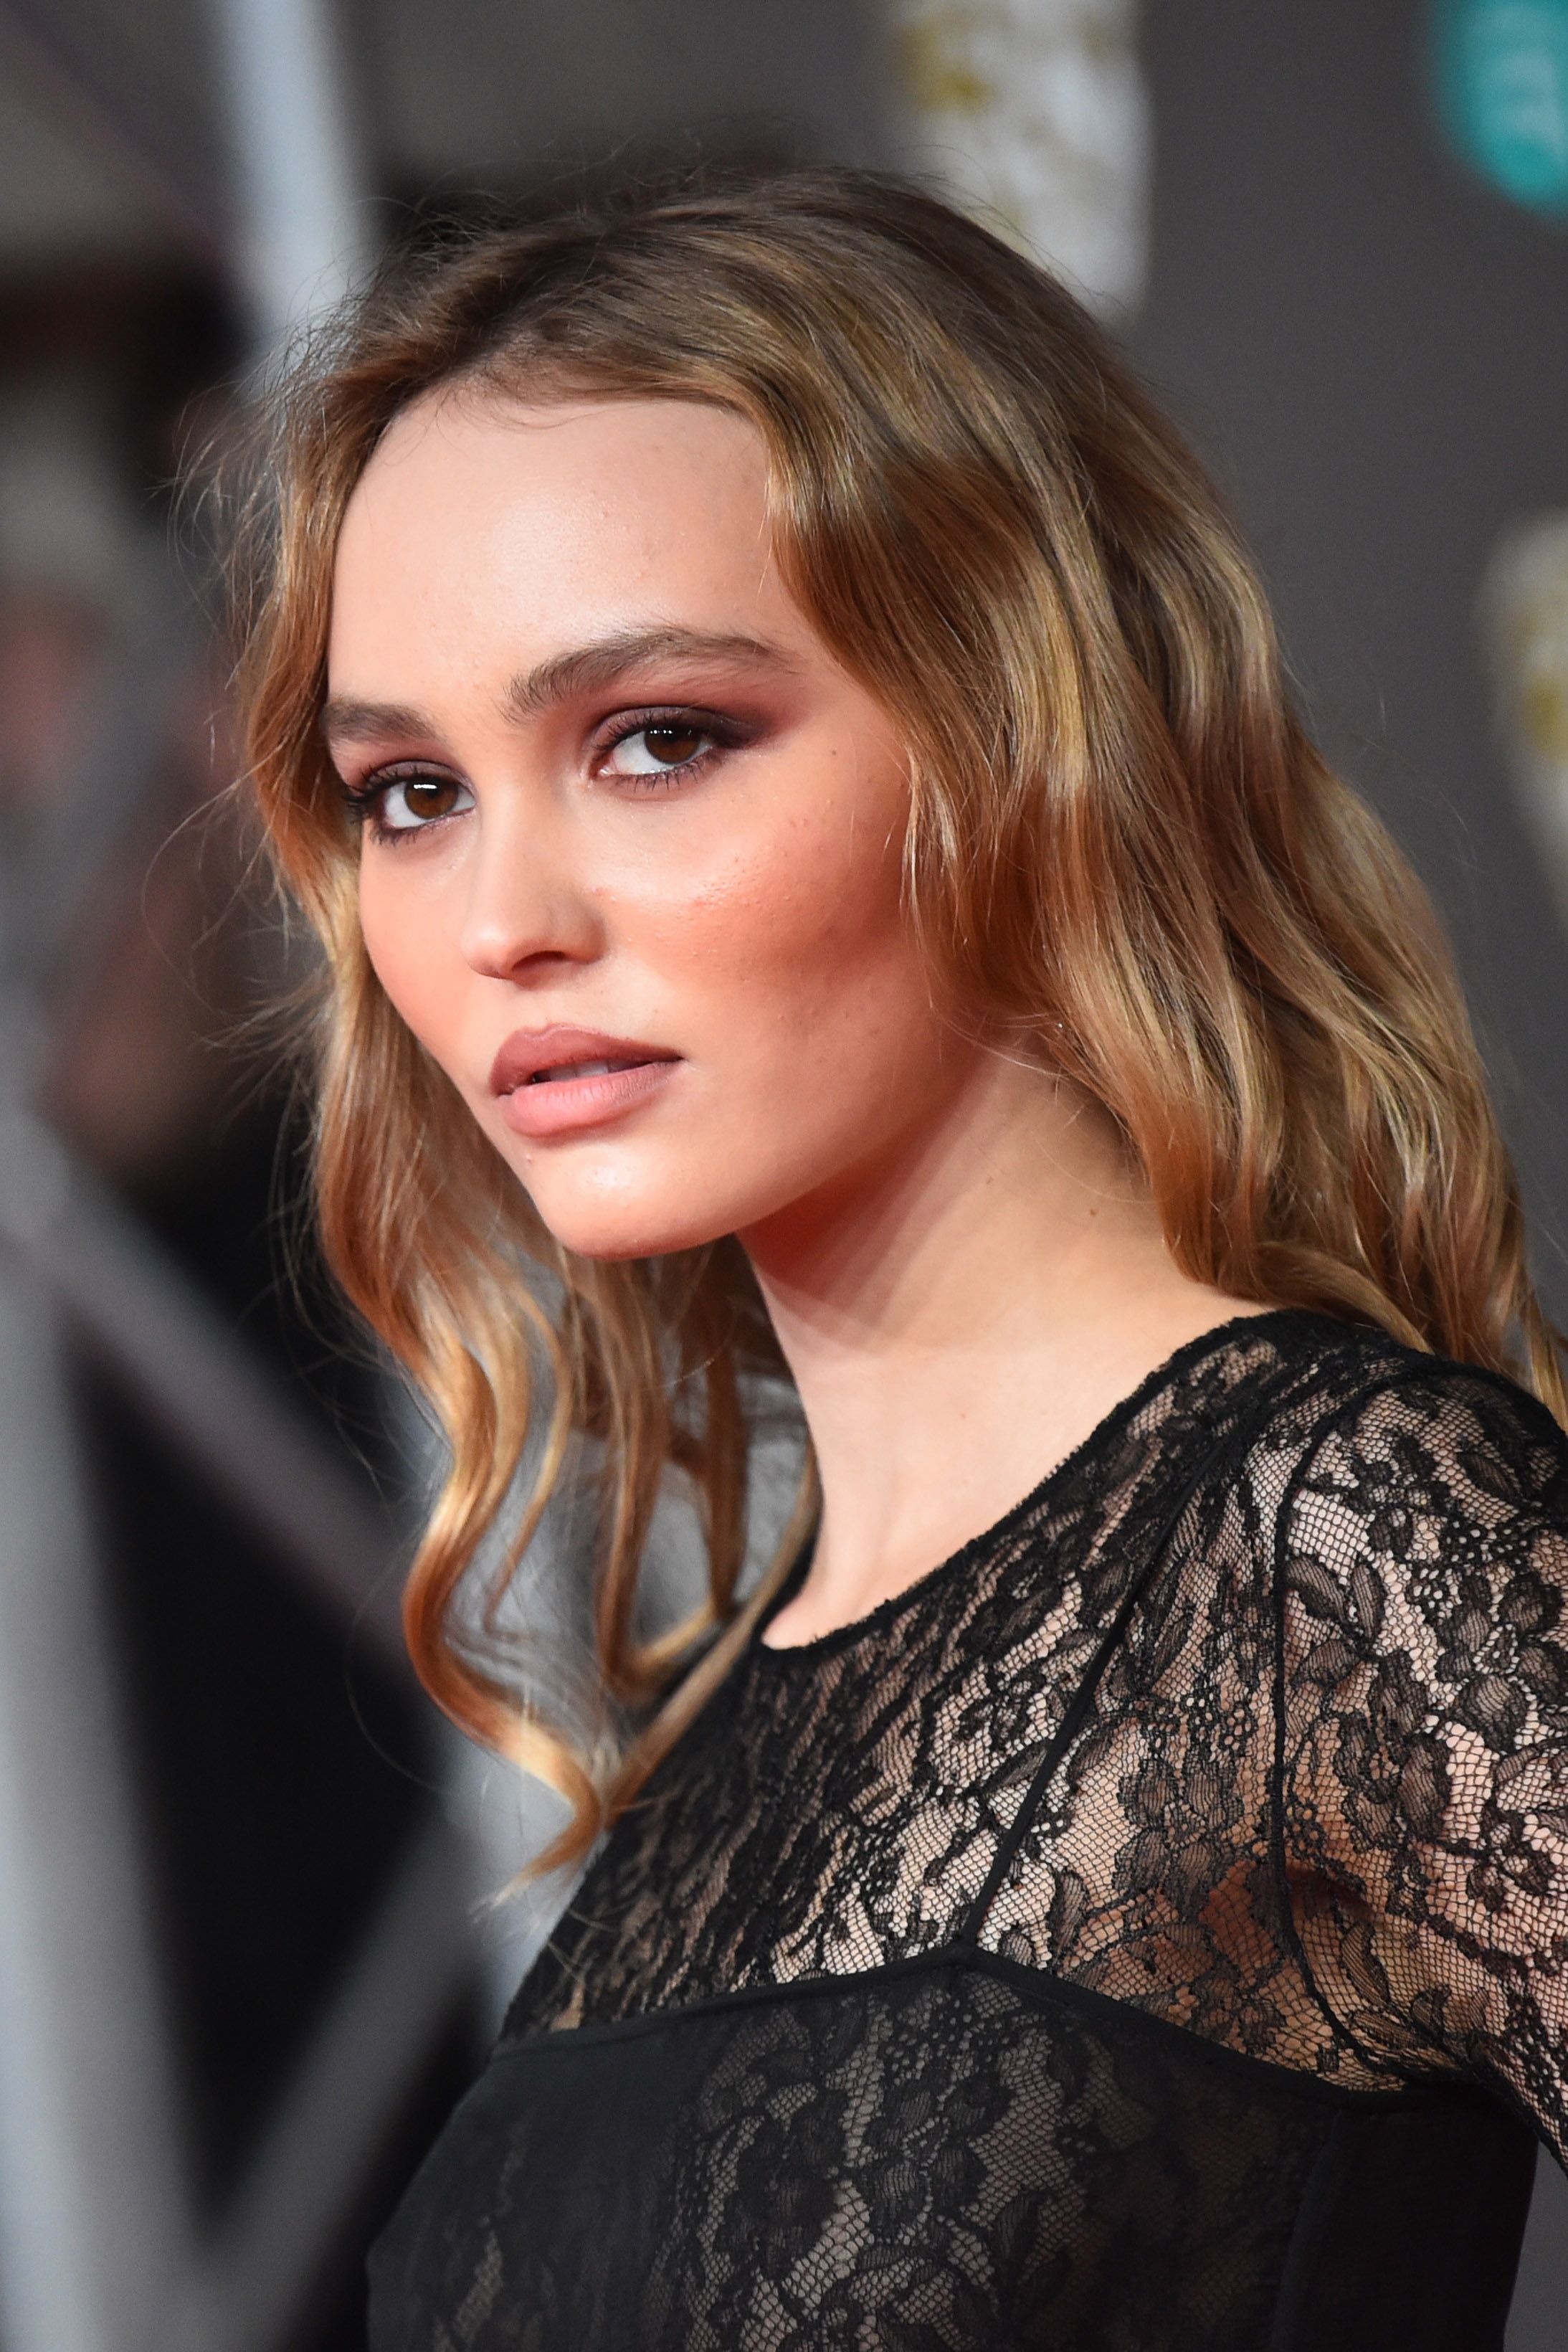 Lily-Rose Depp during the 73rd British Academy Film Awards held at the Royal Albert Hall, London. | Source: Getty Images